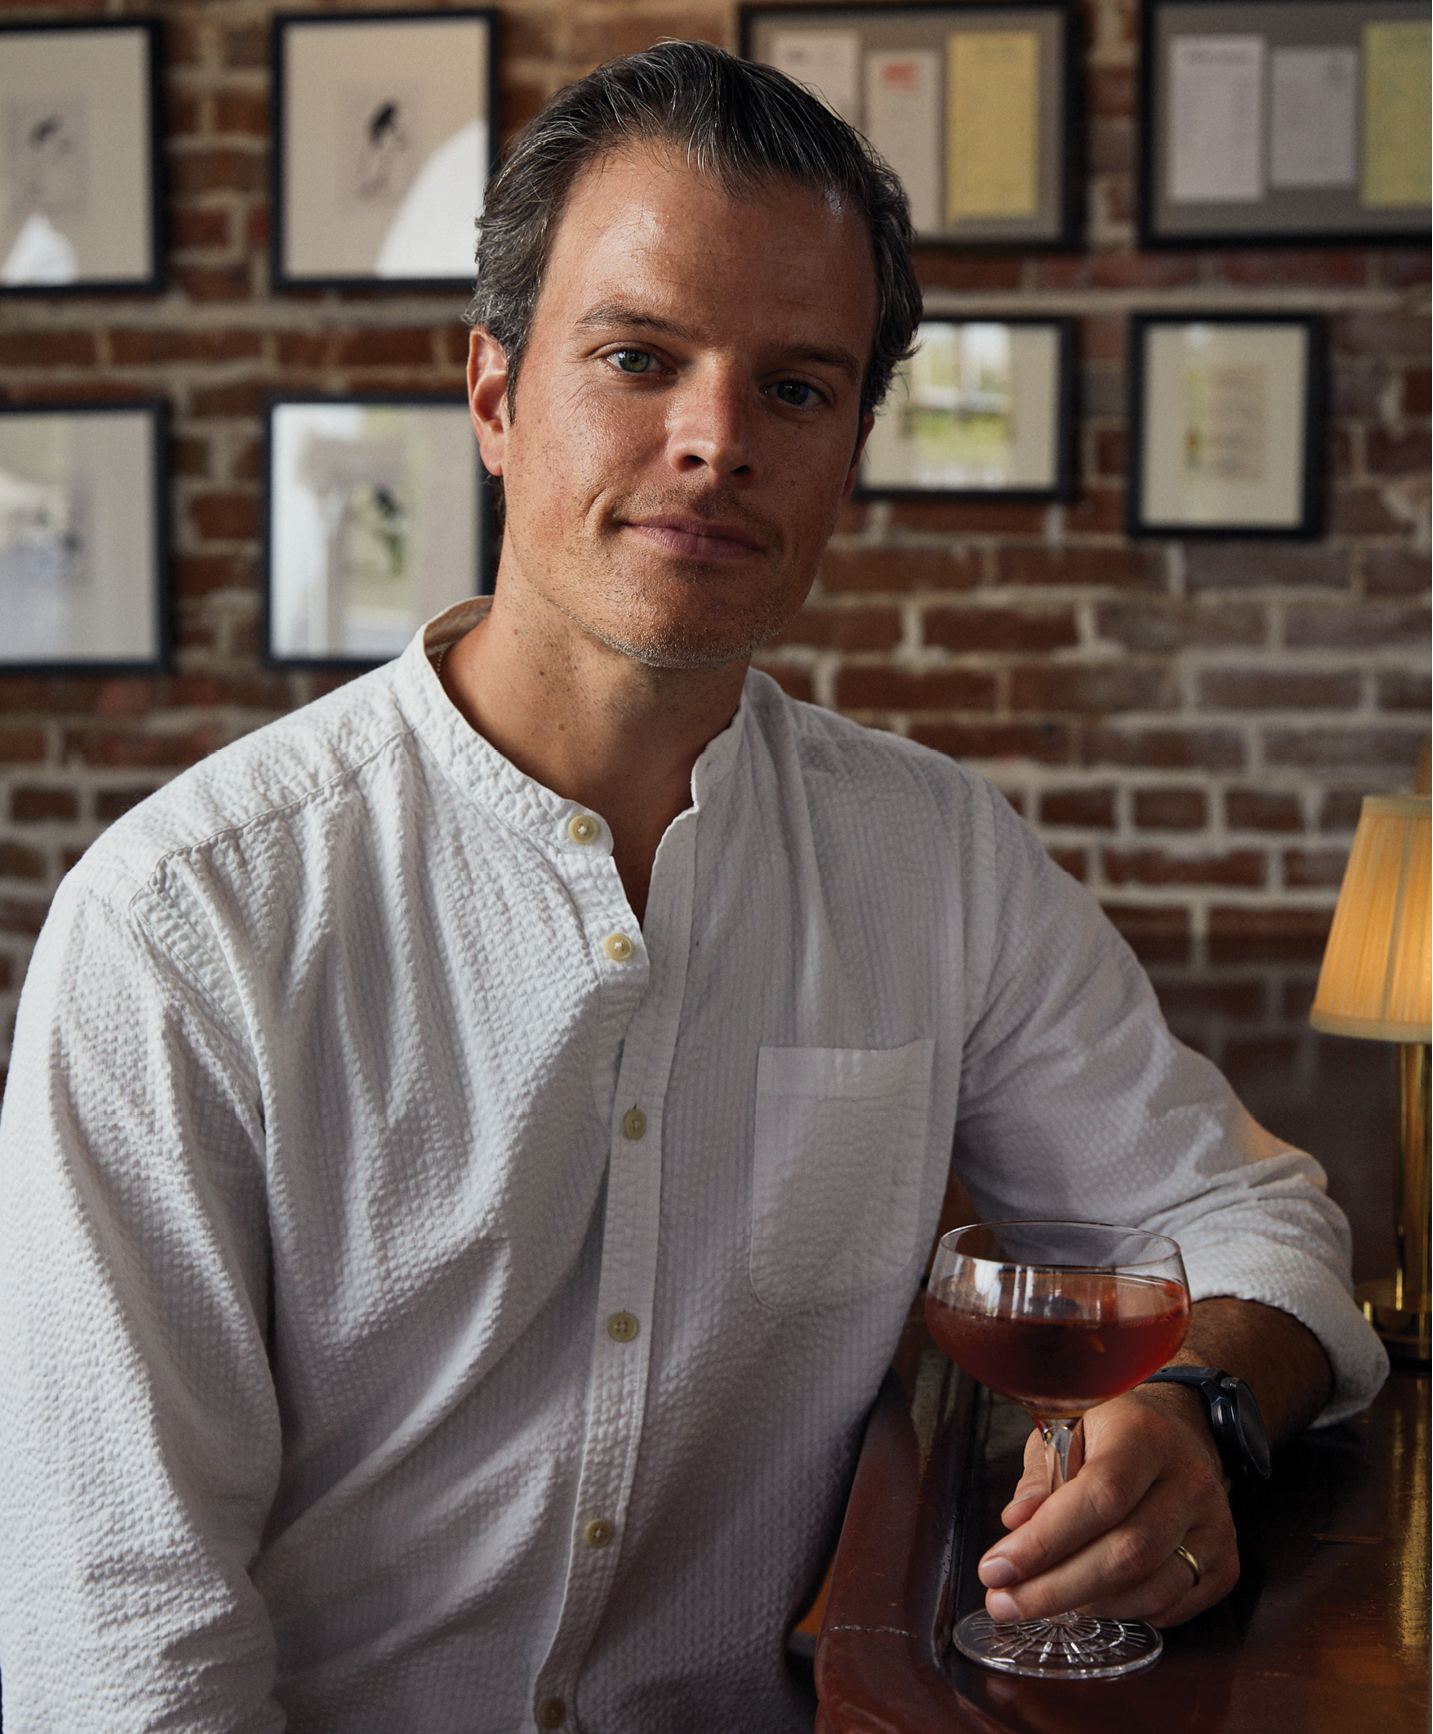 Brooks Reitz has co-founded multiple local restaurants, including Leon’s Oyster Shop,  Little Jack’s Tavern, and  Melfi’s (pictured).